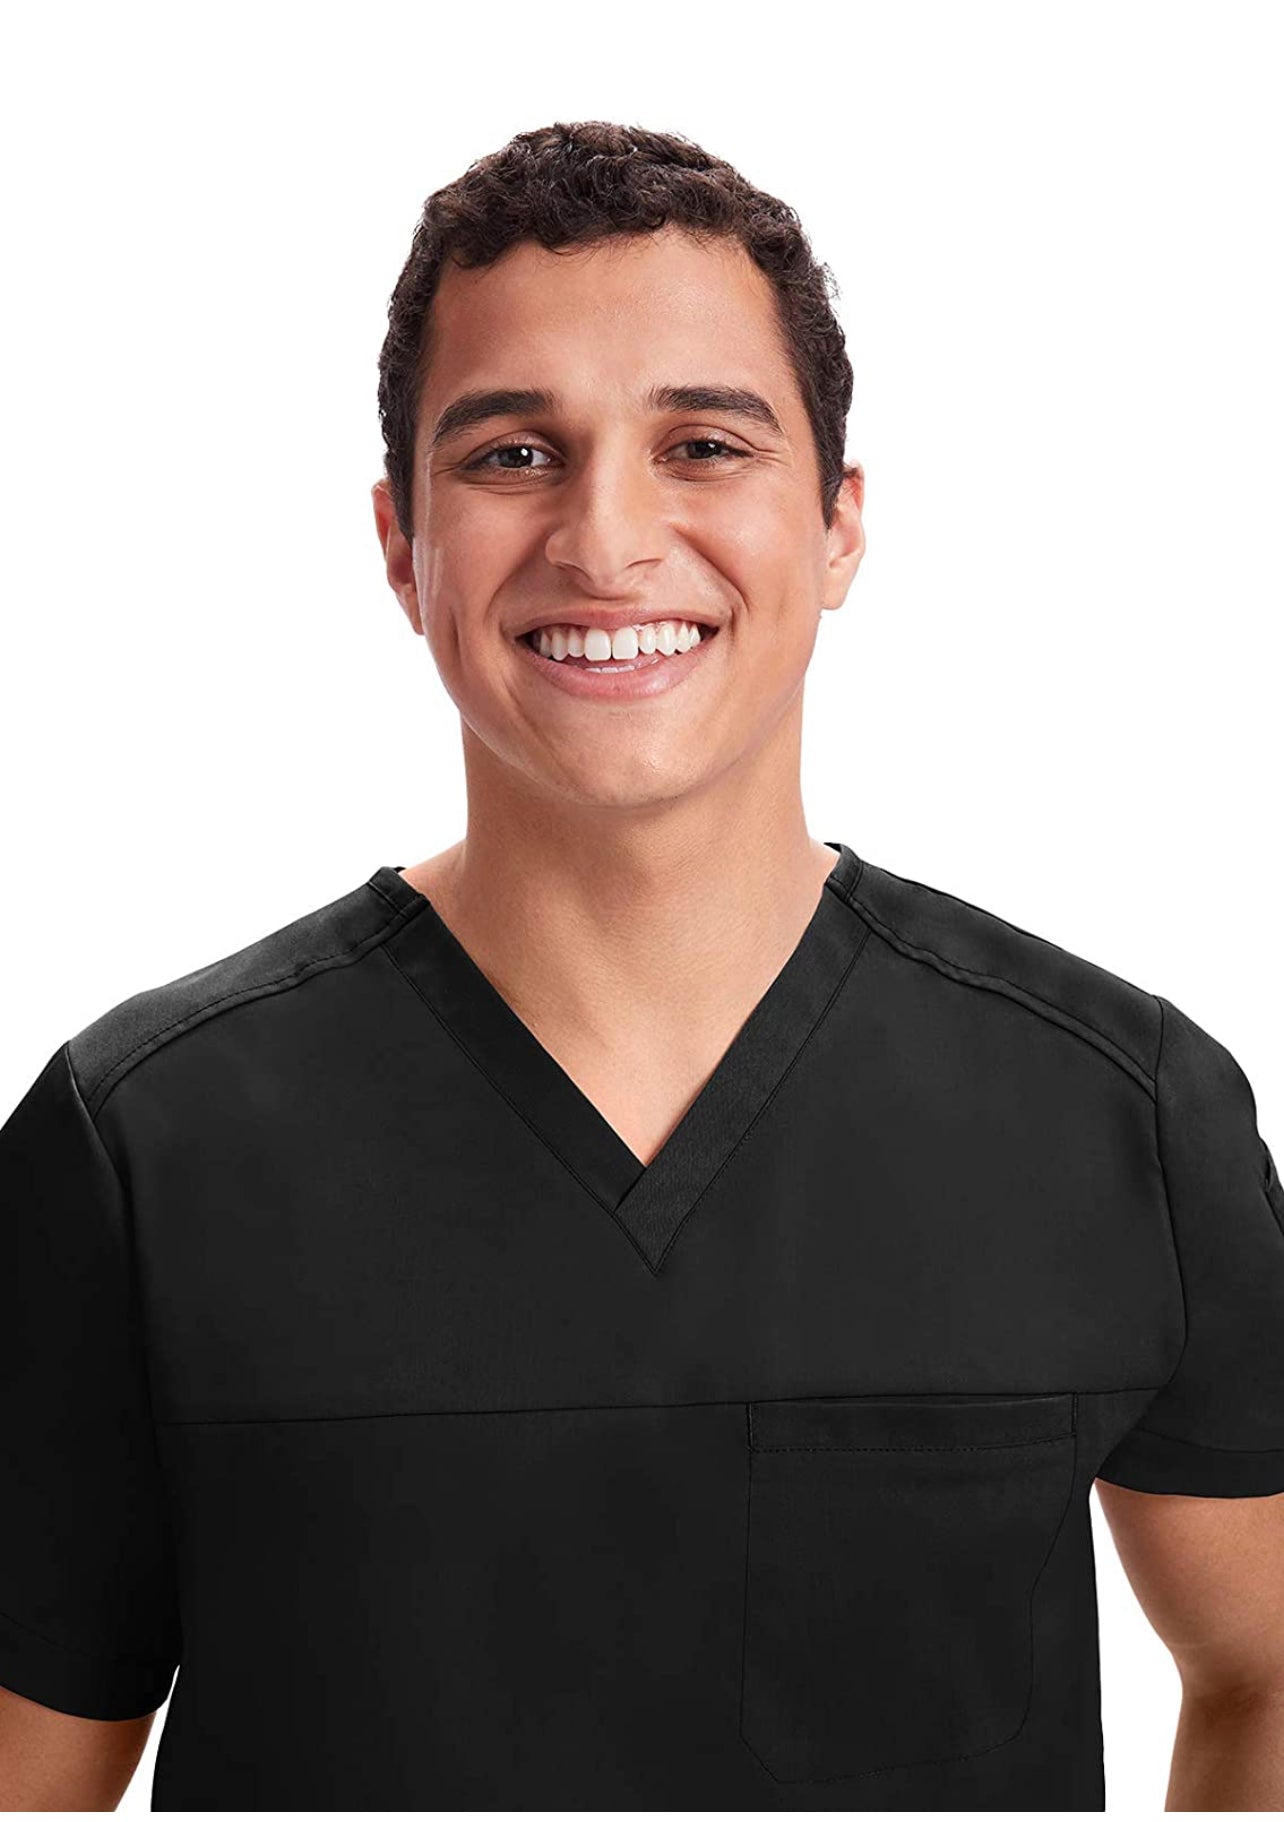 Justin Solid Scrub Top by Healing Hands XS-3XL/Black